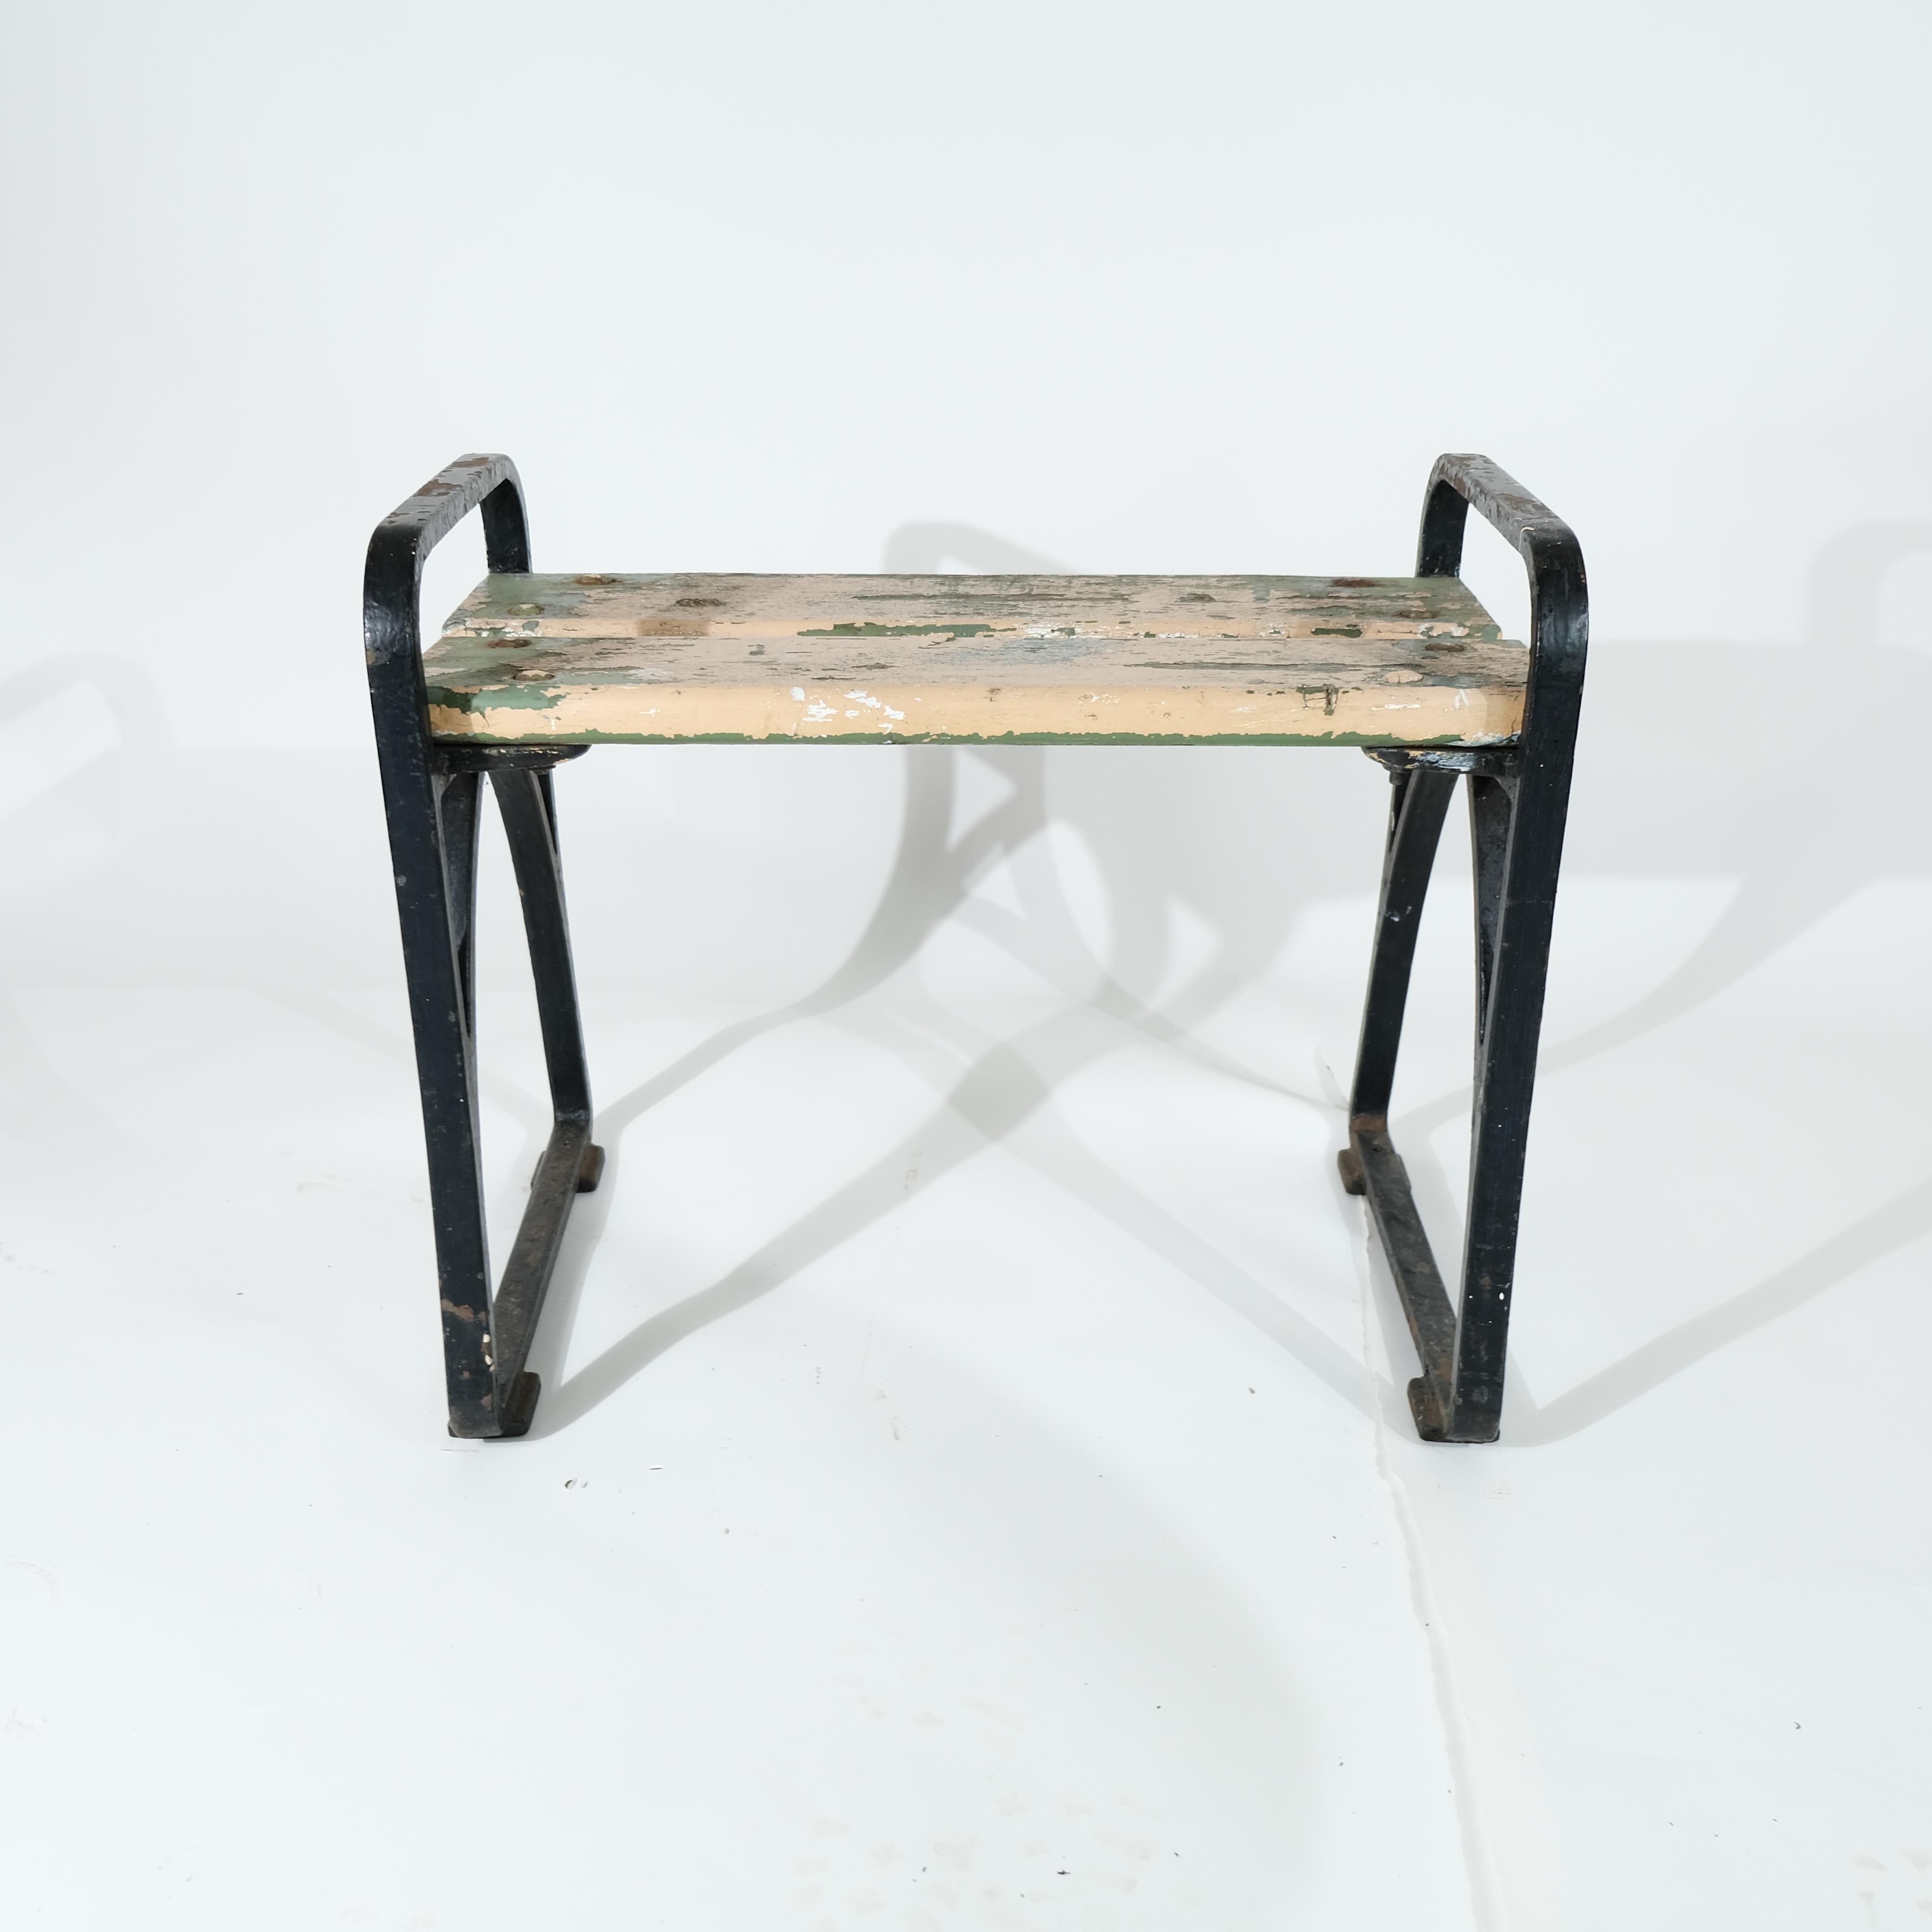 A Swedish stool cast in iron with wood seating in untouched condition. Swedish grace and made around 1930-1940. Perfect for indoors or outdoors use. Designer is unknown but it is a strong design. Seating height ca 43 cm.